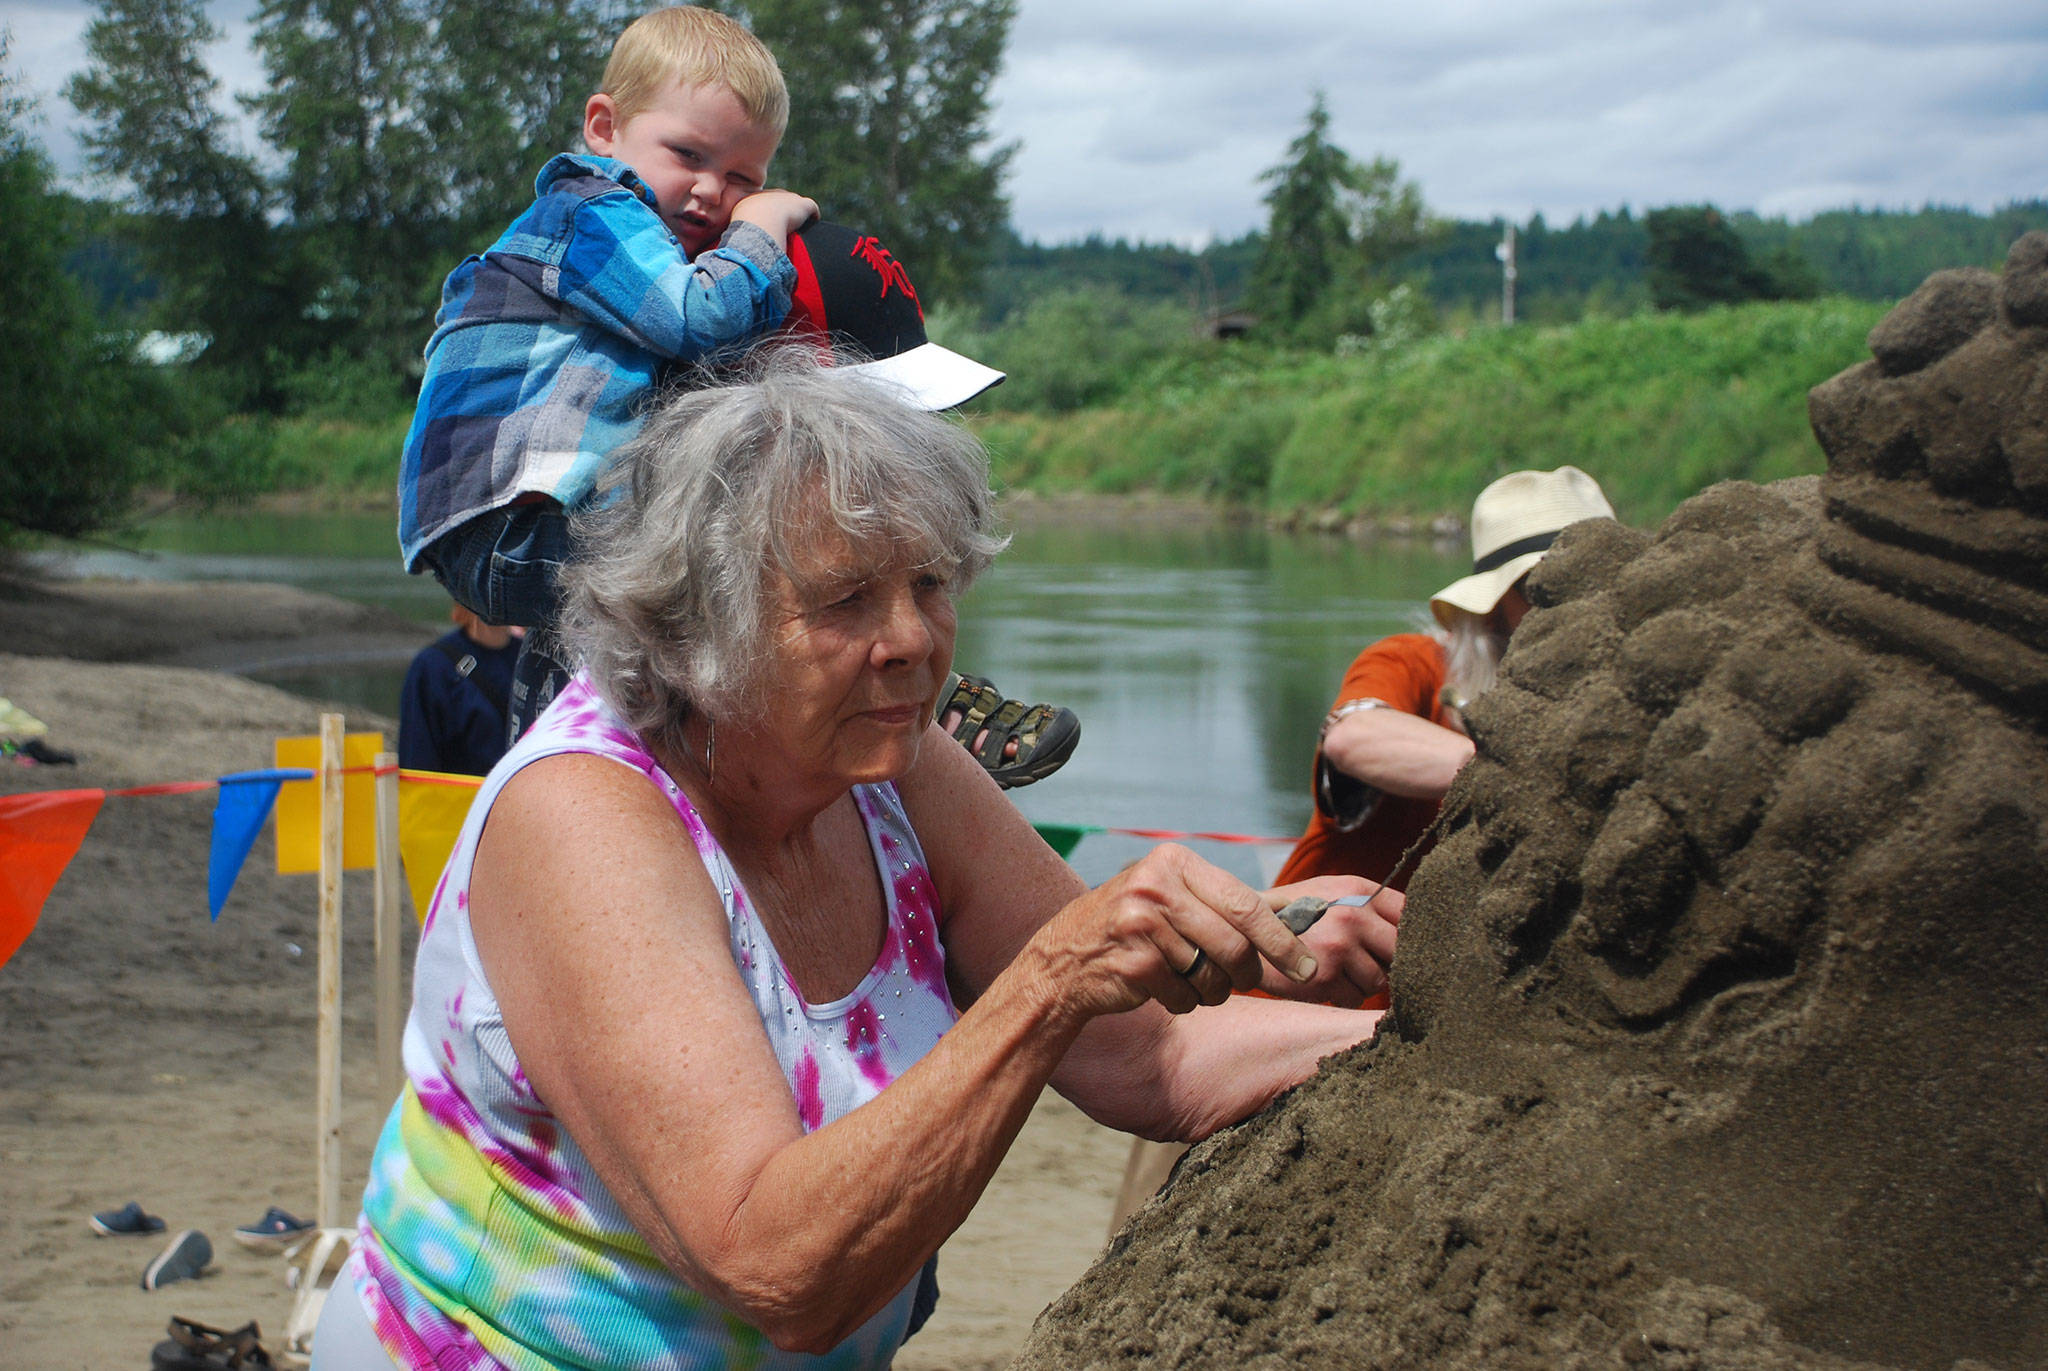 Local artist Kali Bradford plans to create an 8-foot sand sculpture for the Reach and Row and Waterfront Day event on Sept. 15 at John Wayne Marina where proceeds benefit Volunteer Hospice of Clallam County. Submitted photo